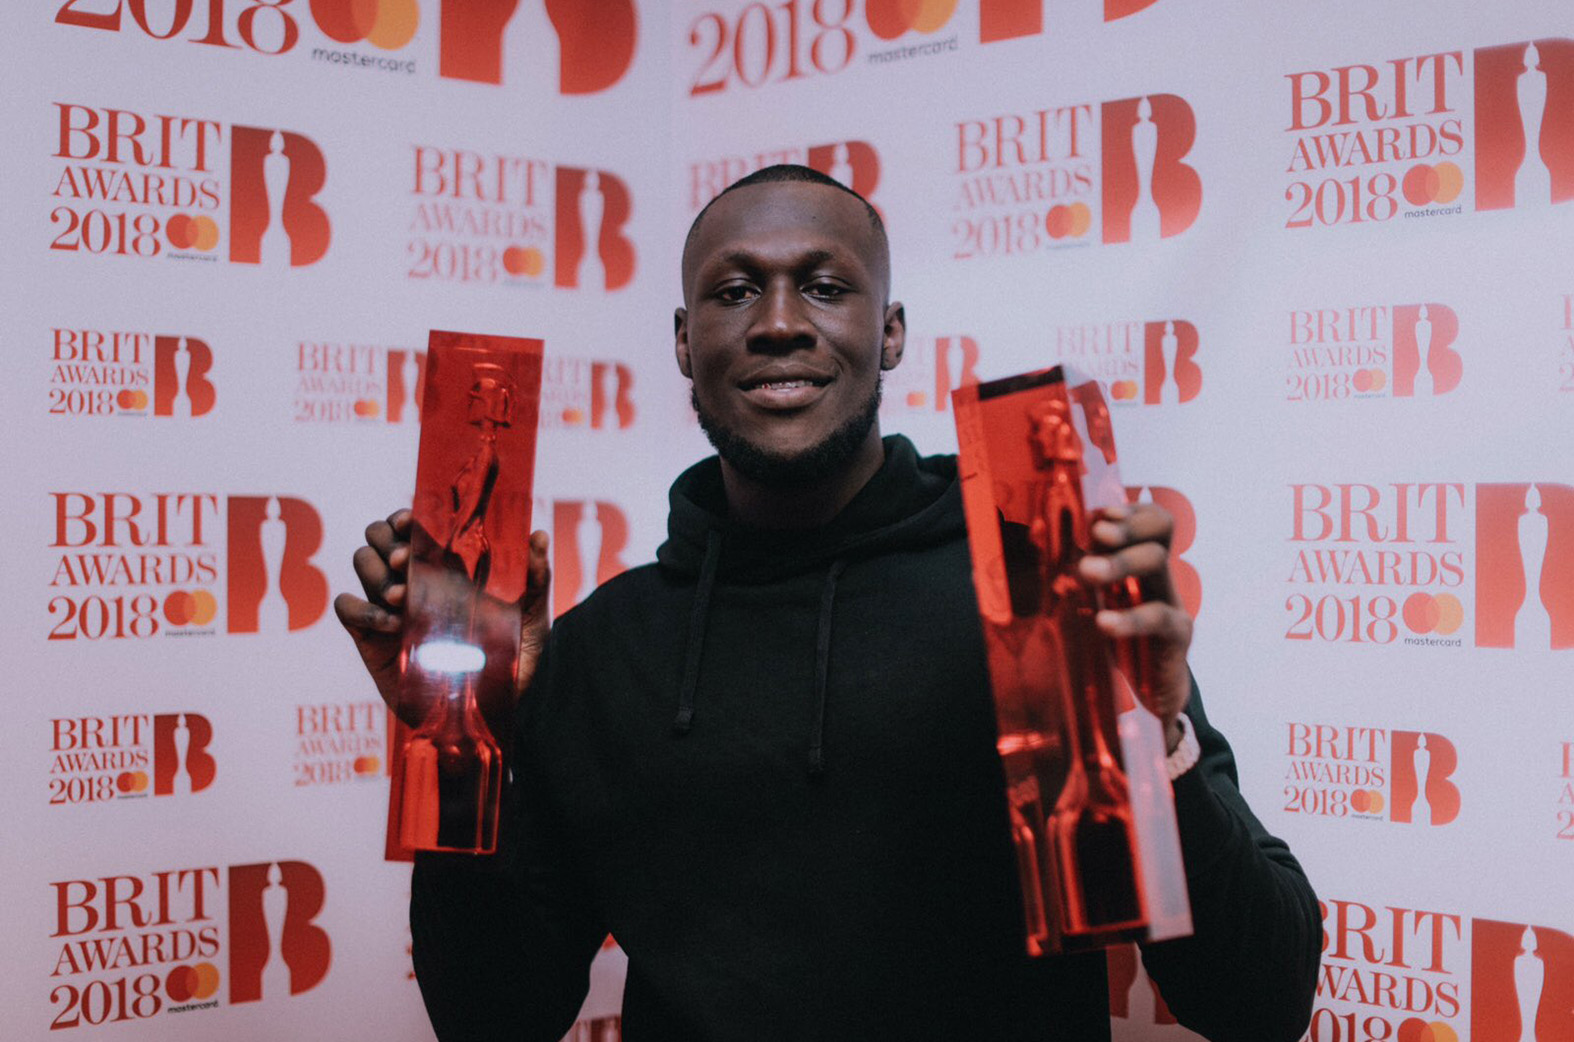 Stormzy wins 2 and lights up 2018 Brits Awards